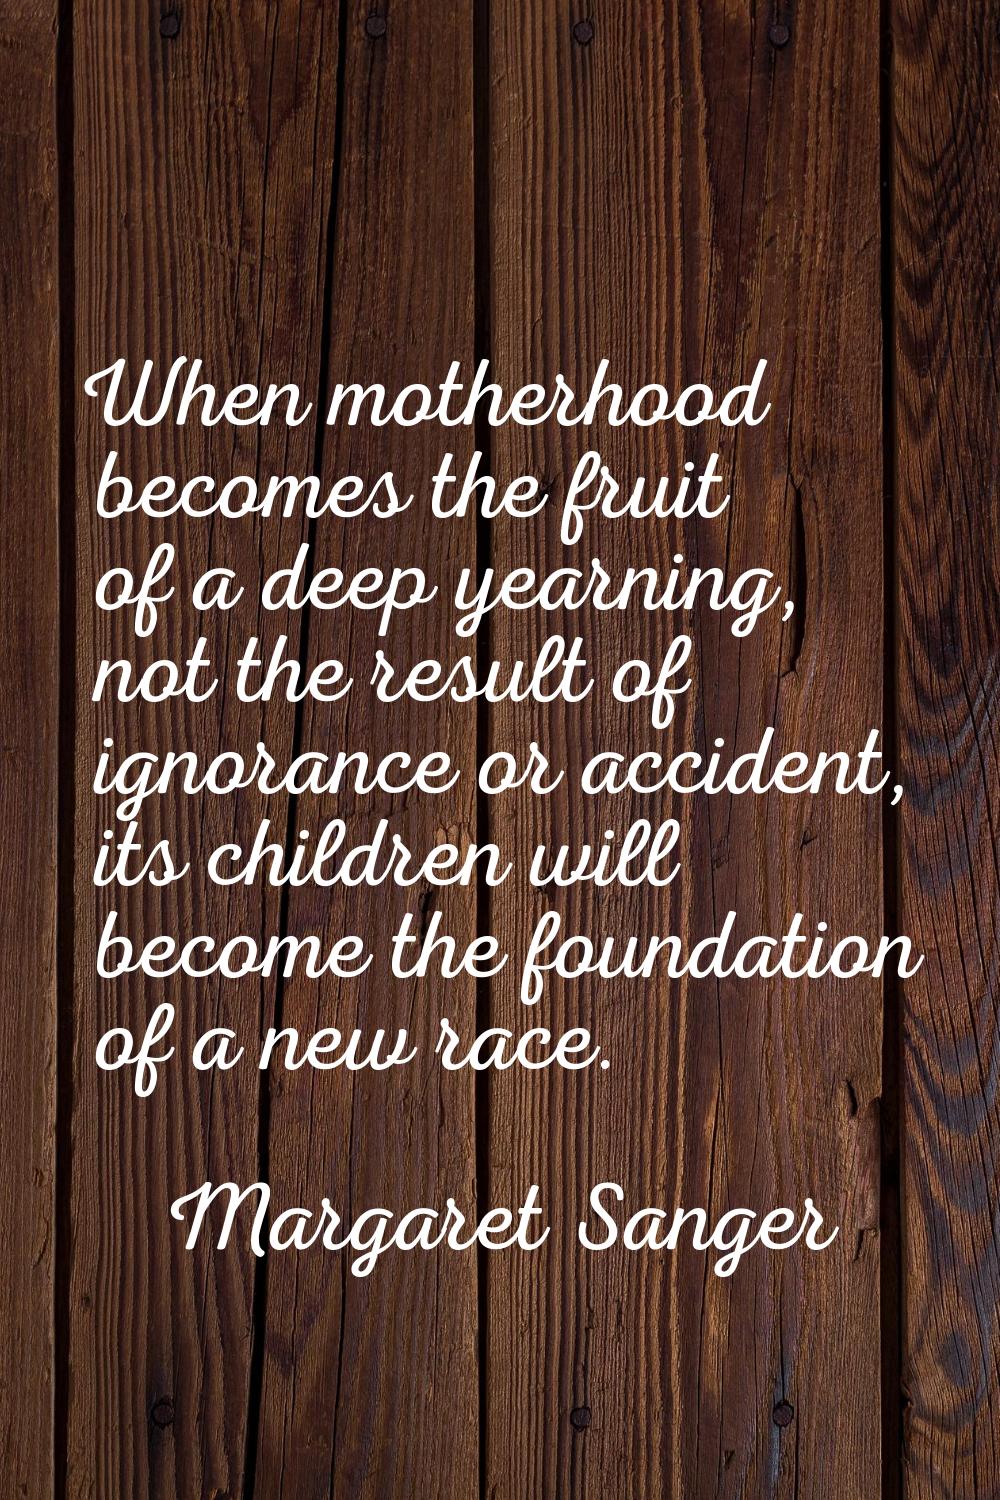 When motherhood becomes the fruit of a deep yearning, not the result of ignorance or accident, its 